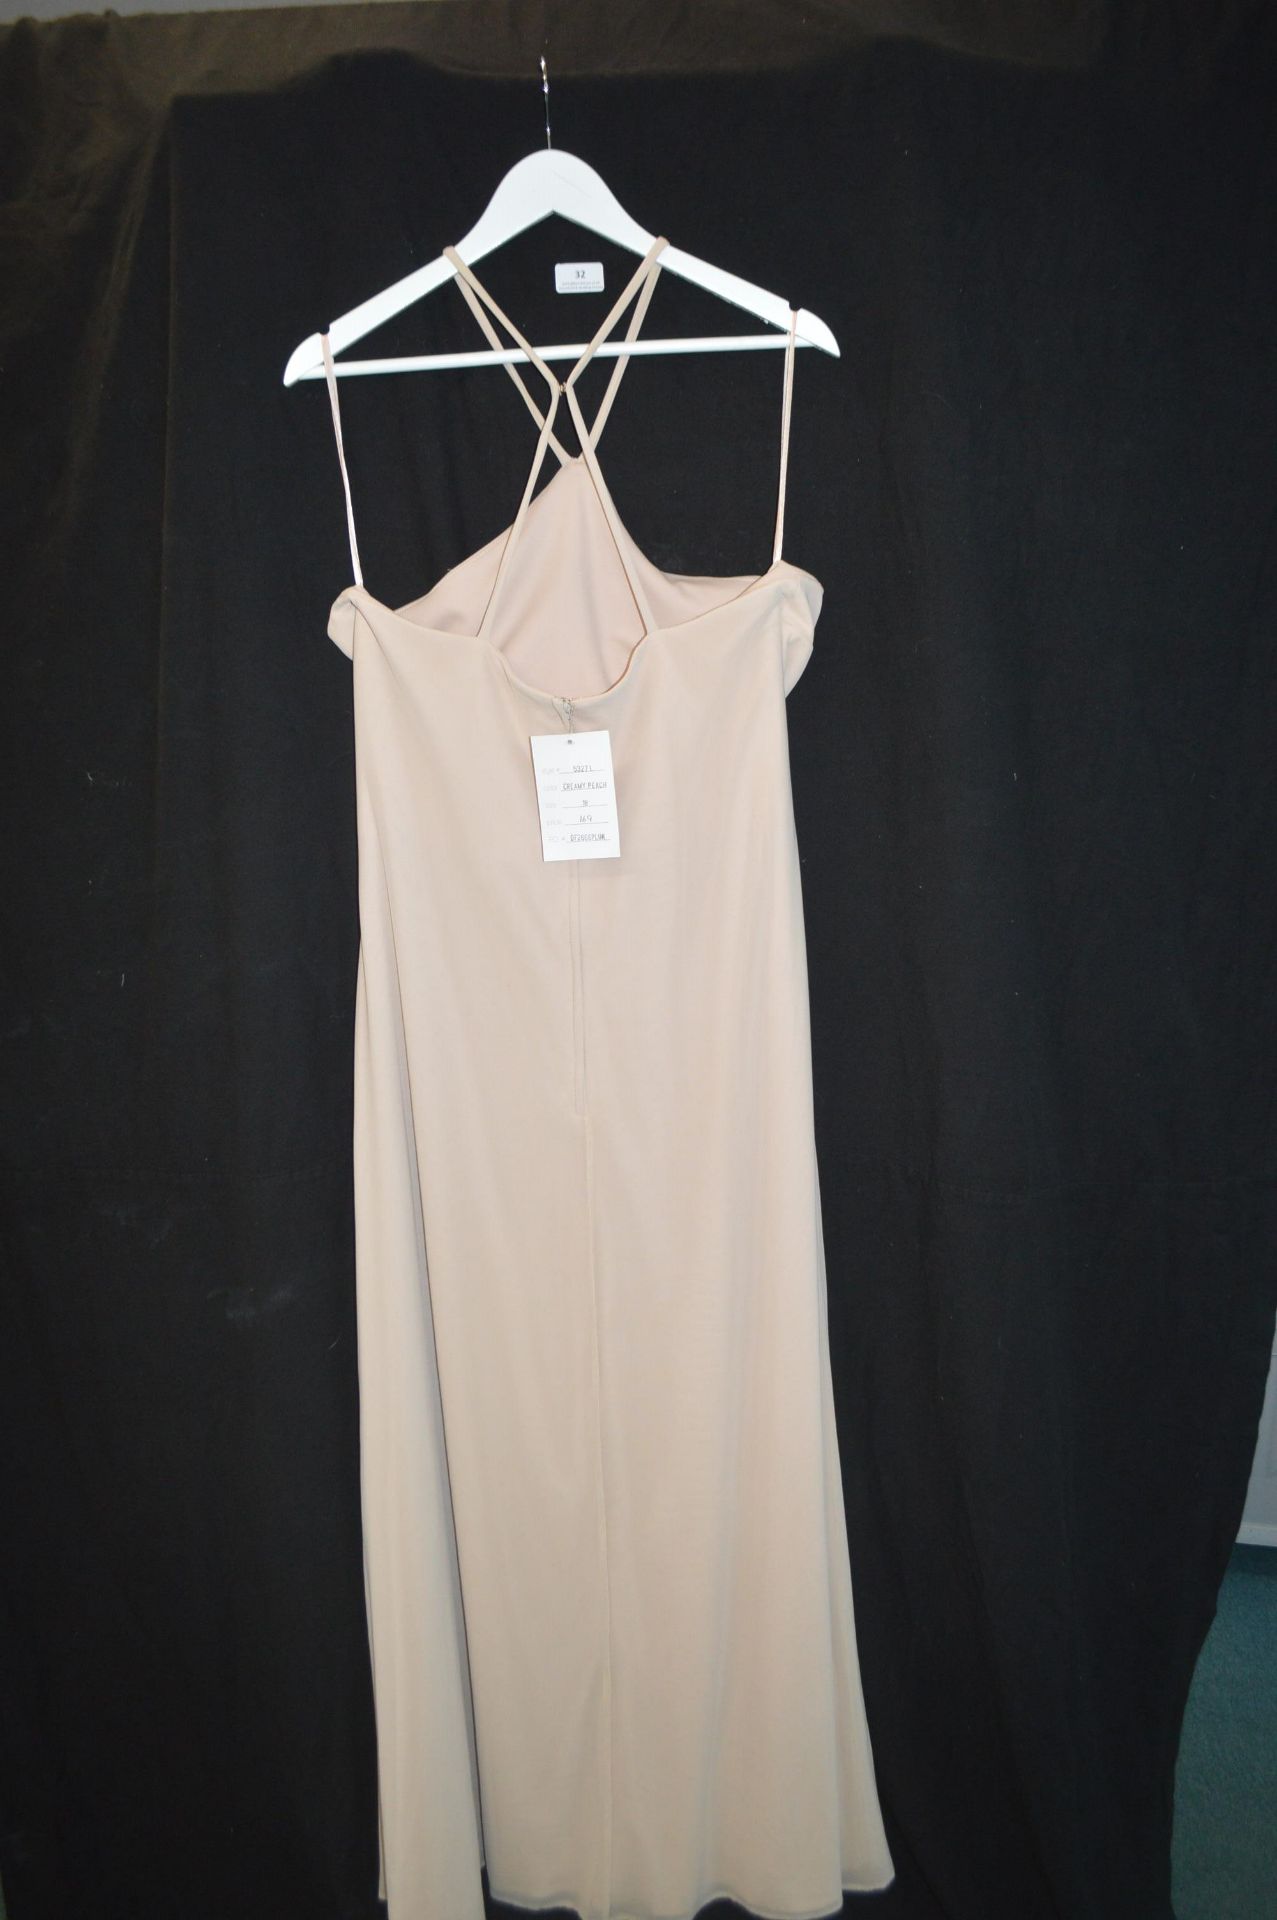 Prom Dress in Creamy Peach by Kenneth Winston for Private Label Size: 18 - Image 2 of 2